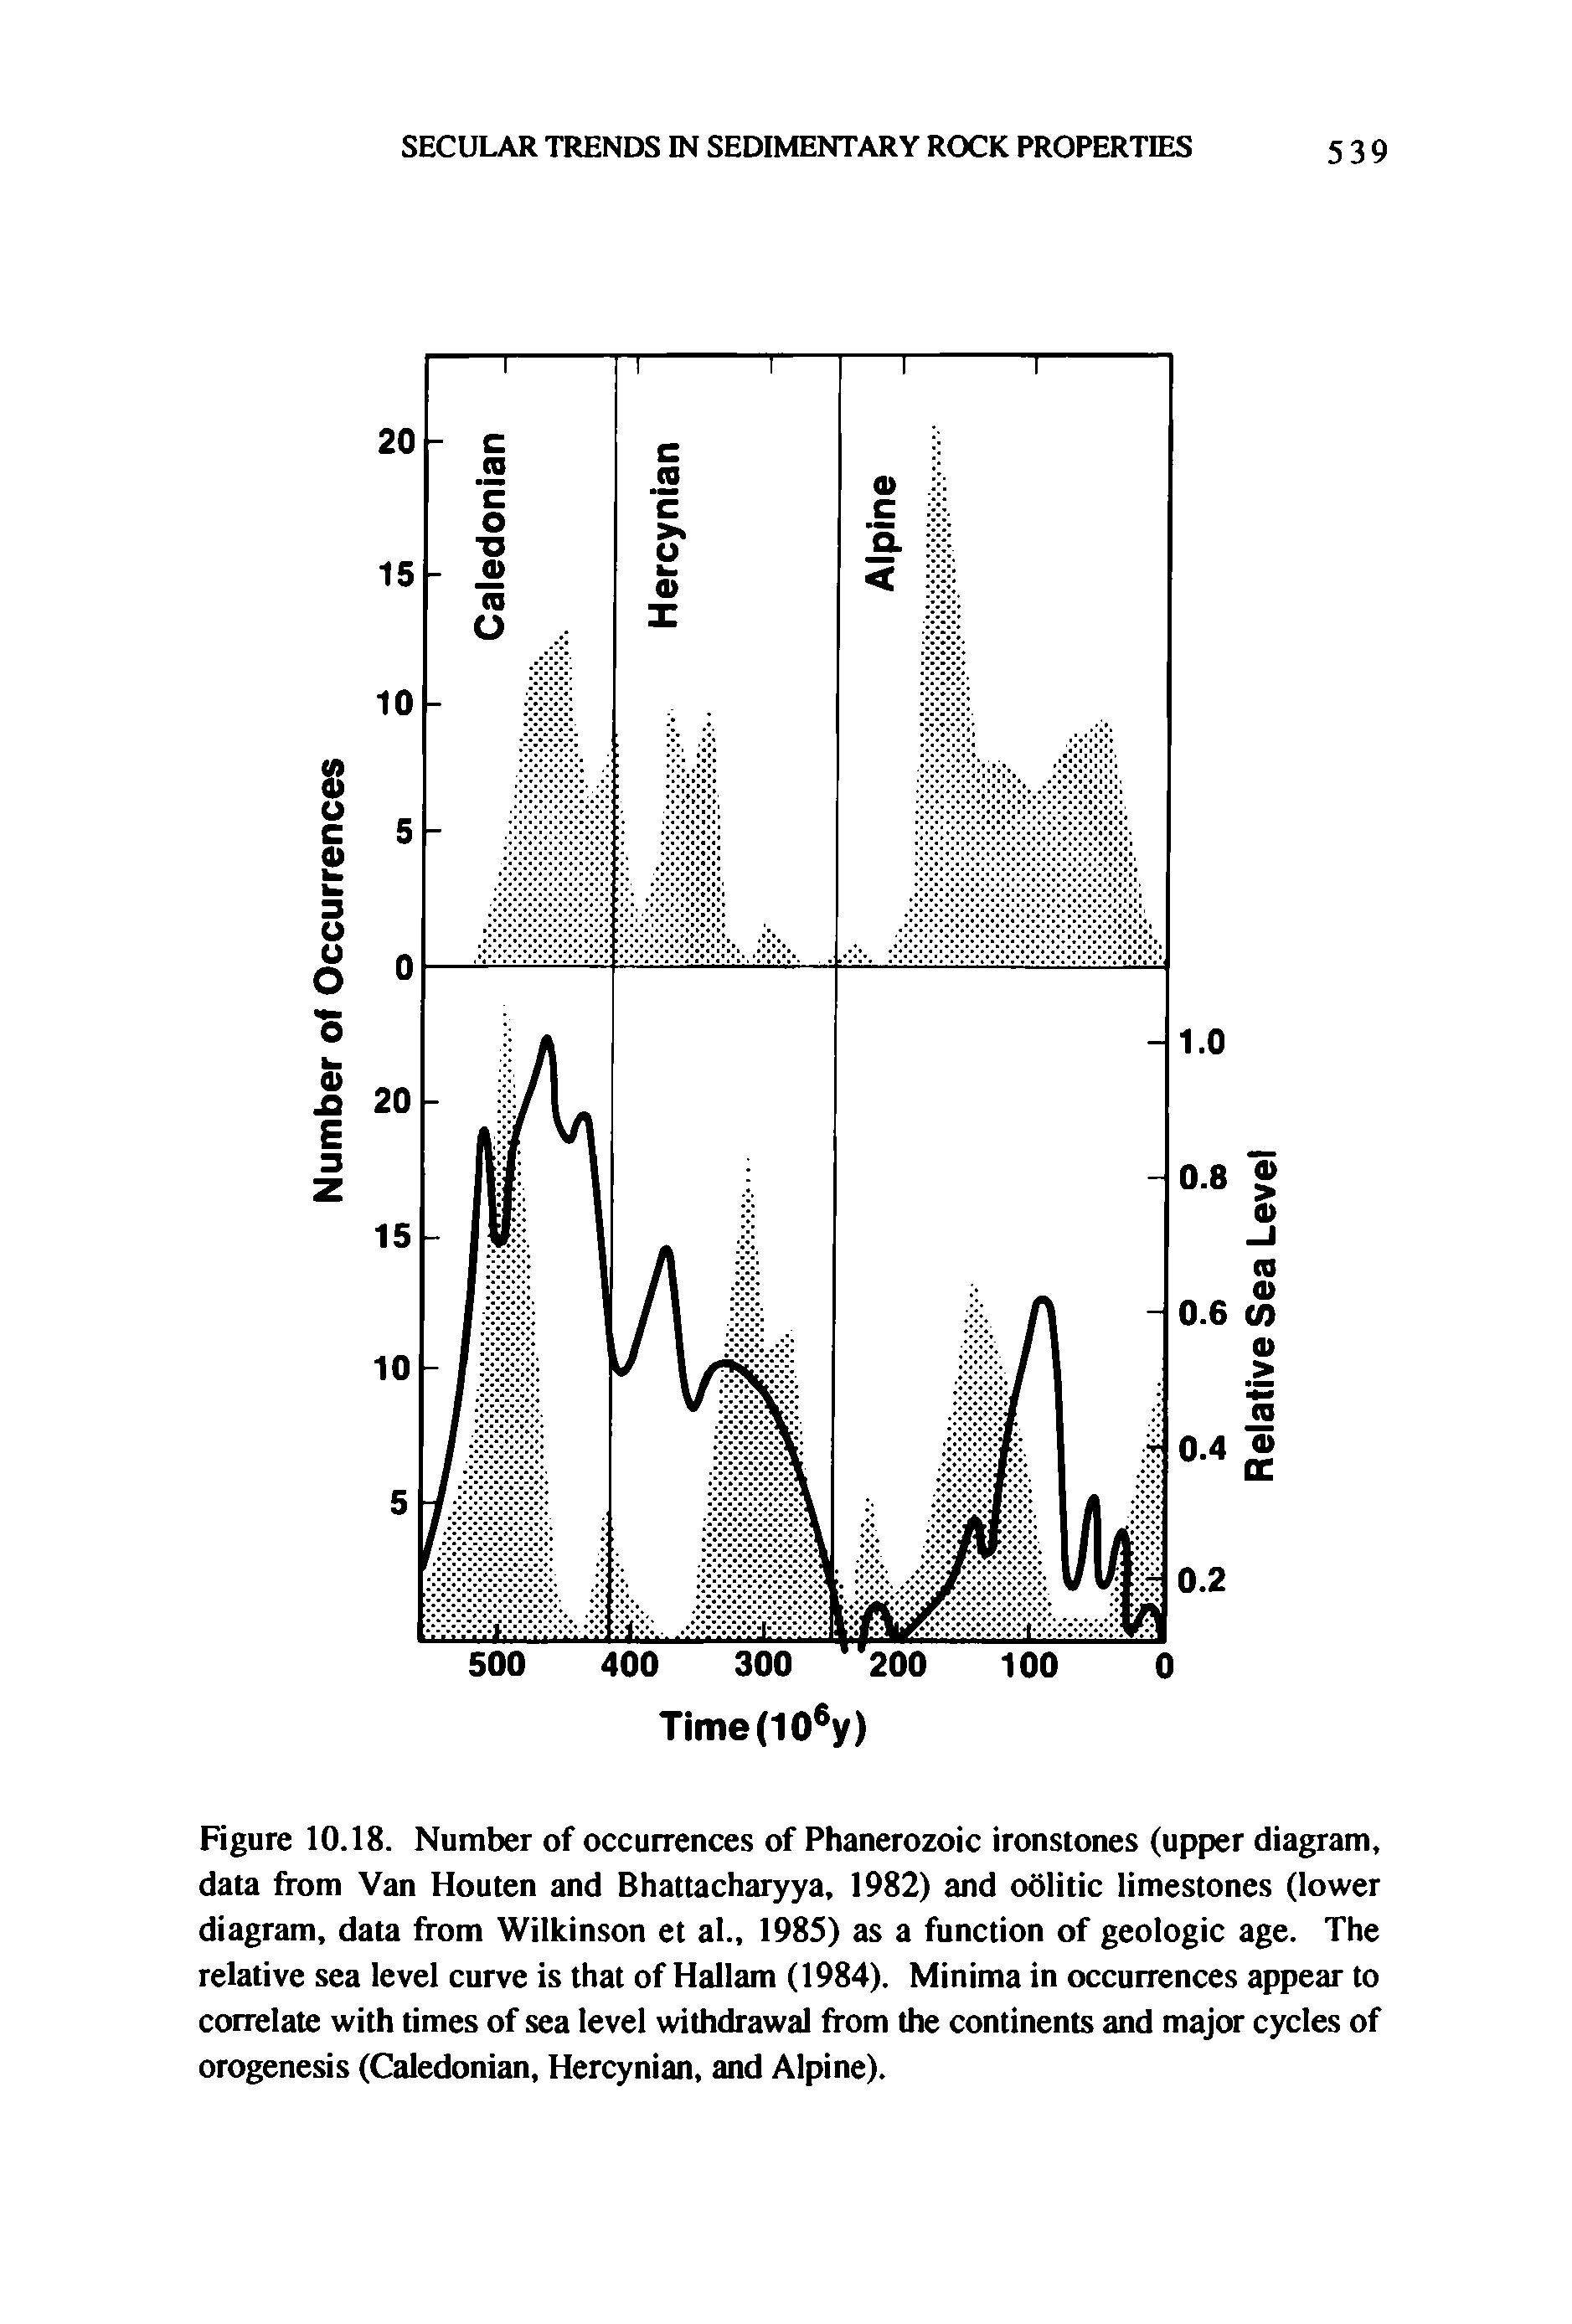 Figure 10.18. Number of occurrences of Phanerozoic ironstones (upper diagram, data from Van Houten and Bhattacharyya, 1982) and odlitic limestones (lower diagram, data from Wilkinson et al., 1985) as a function of geologic age. The relative sea level curve is that of Hallam (1984). Minima in occurrences appear to correlate with times of sea level withdrawal from the continents and major cycles of orogenesis (Caledonian, Hercynian, and Alpine).